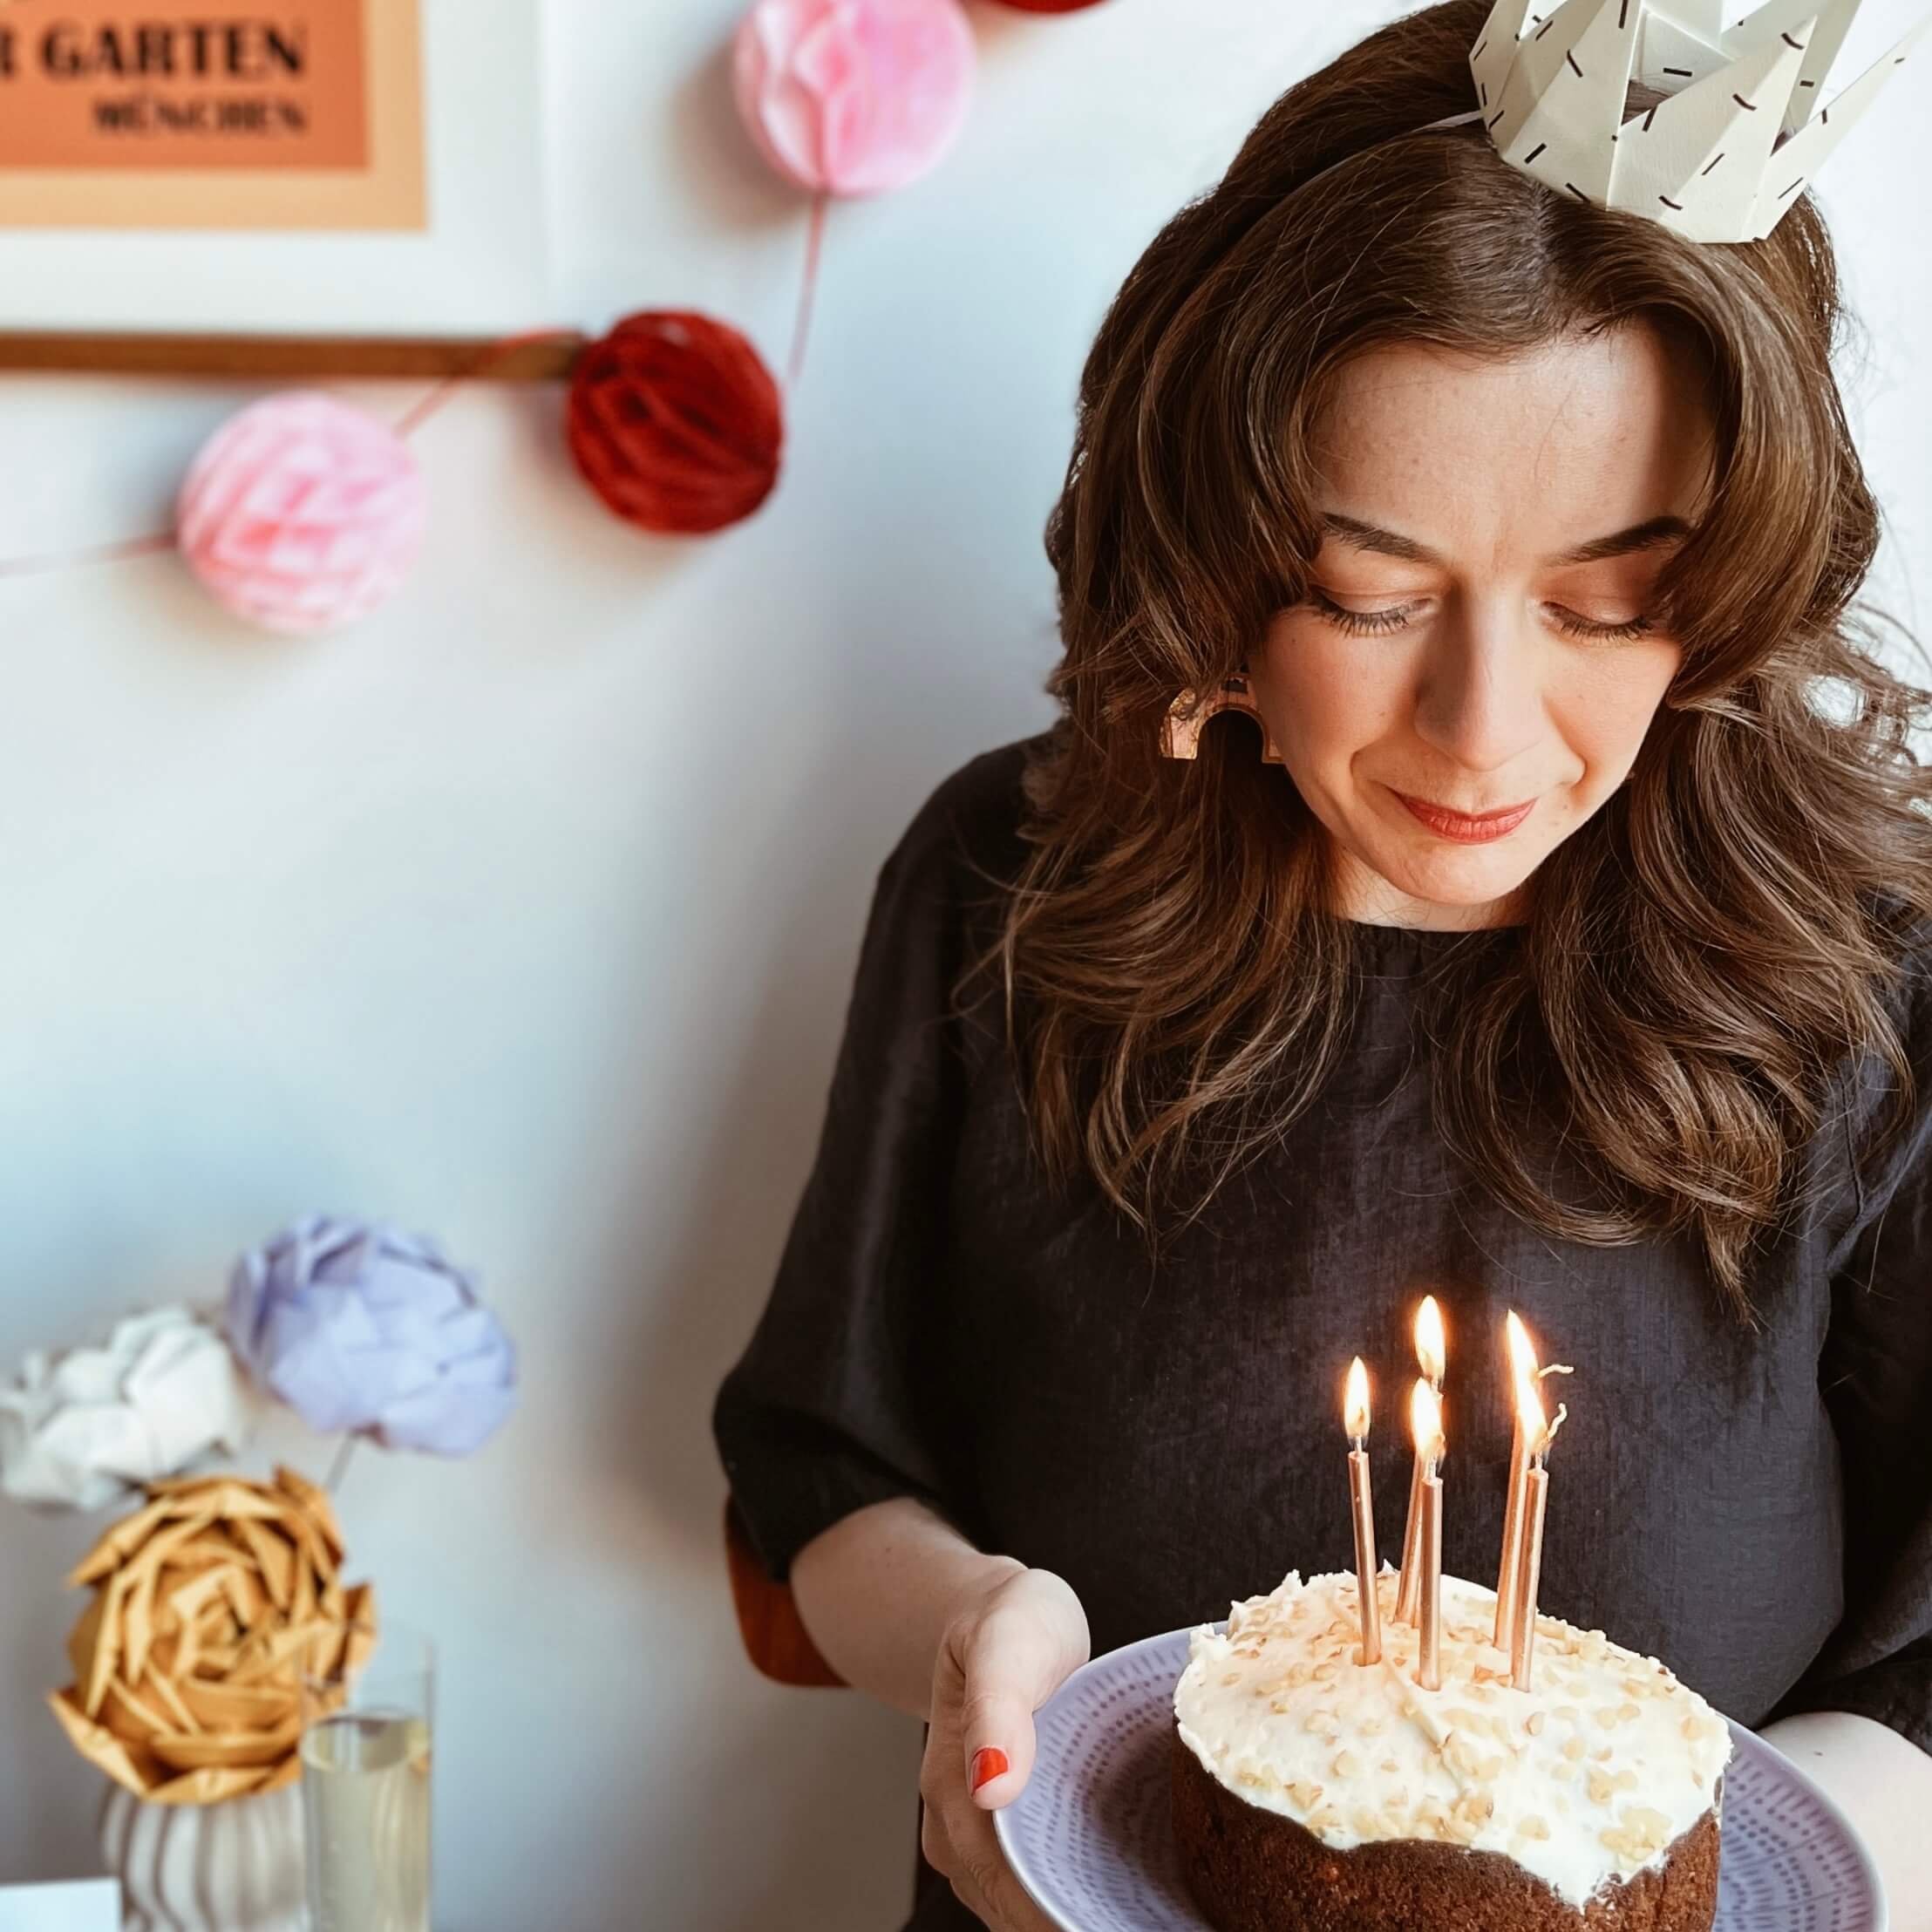 Sara Moore of Whole Punching, holding a birthday cake with candles